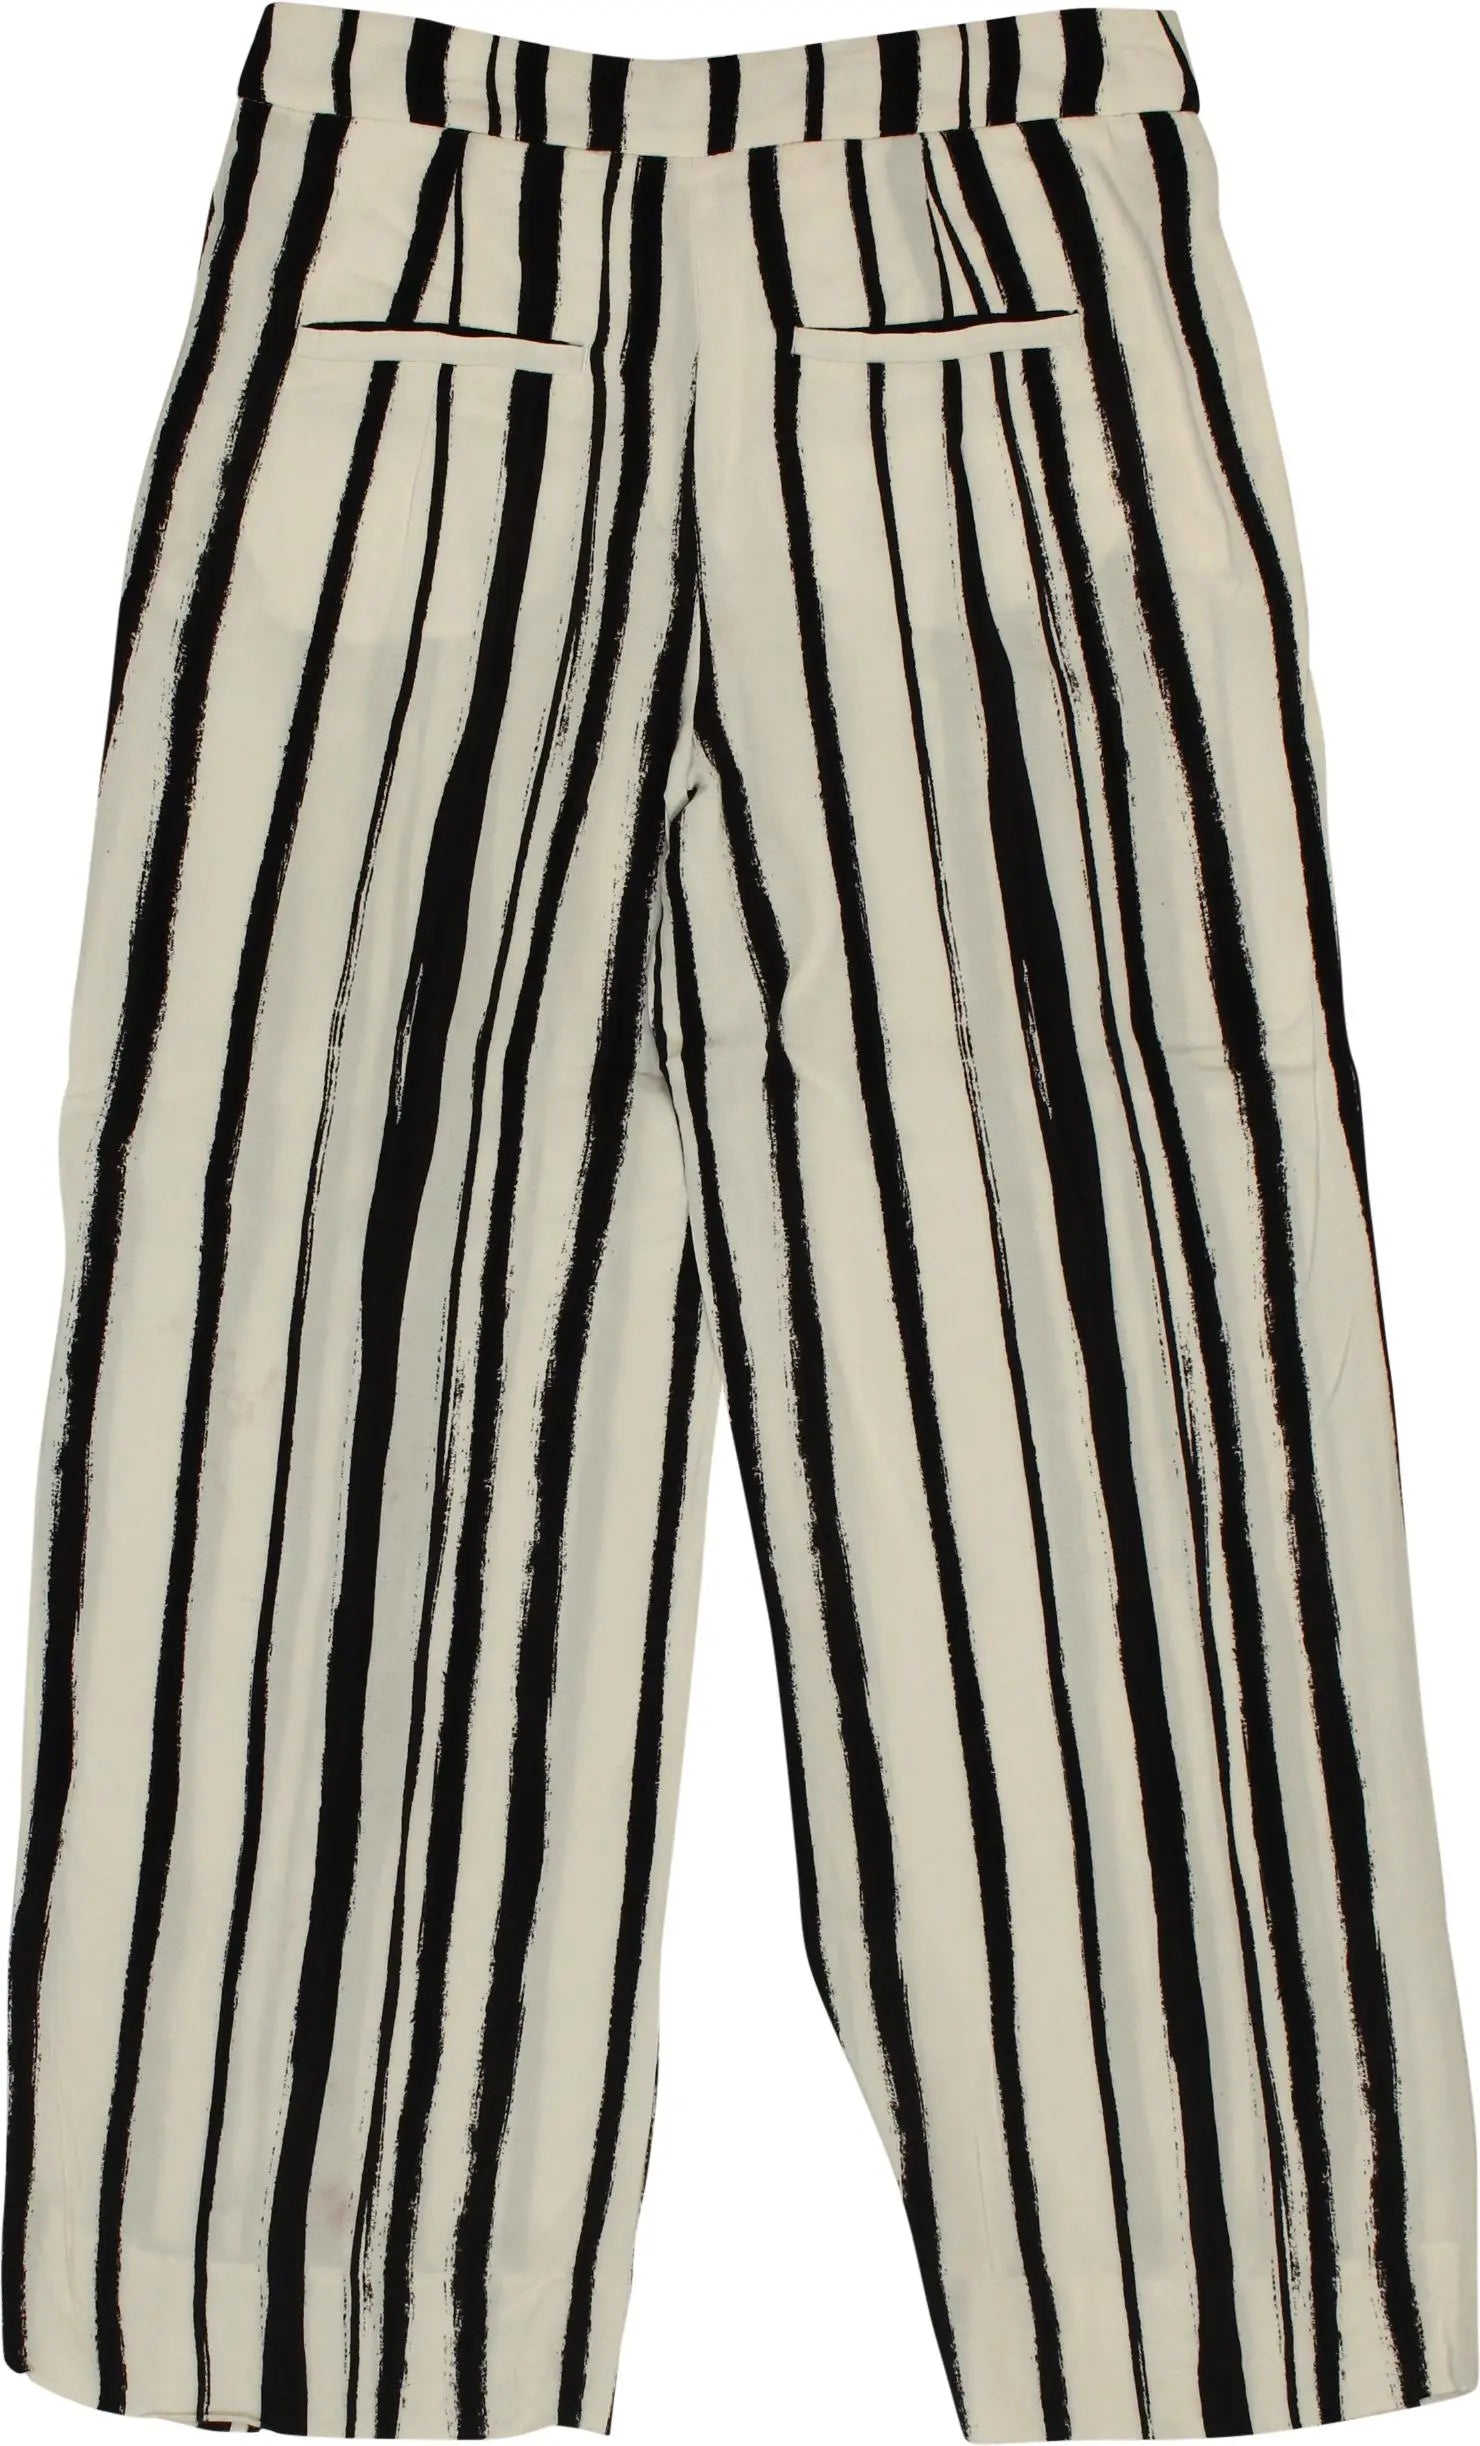 Zara - Striped Culotte- ThriftTale.com - Vintage and second handclothing